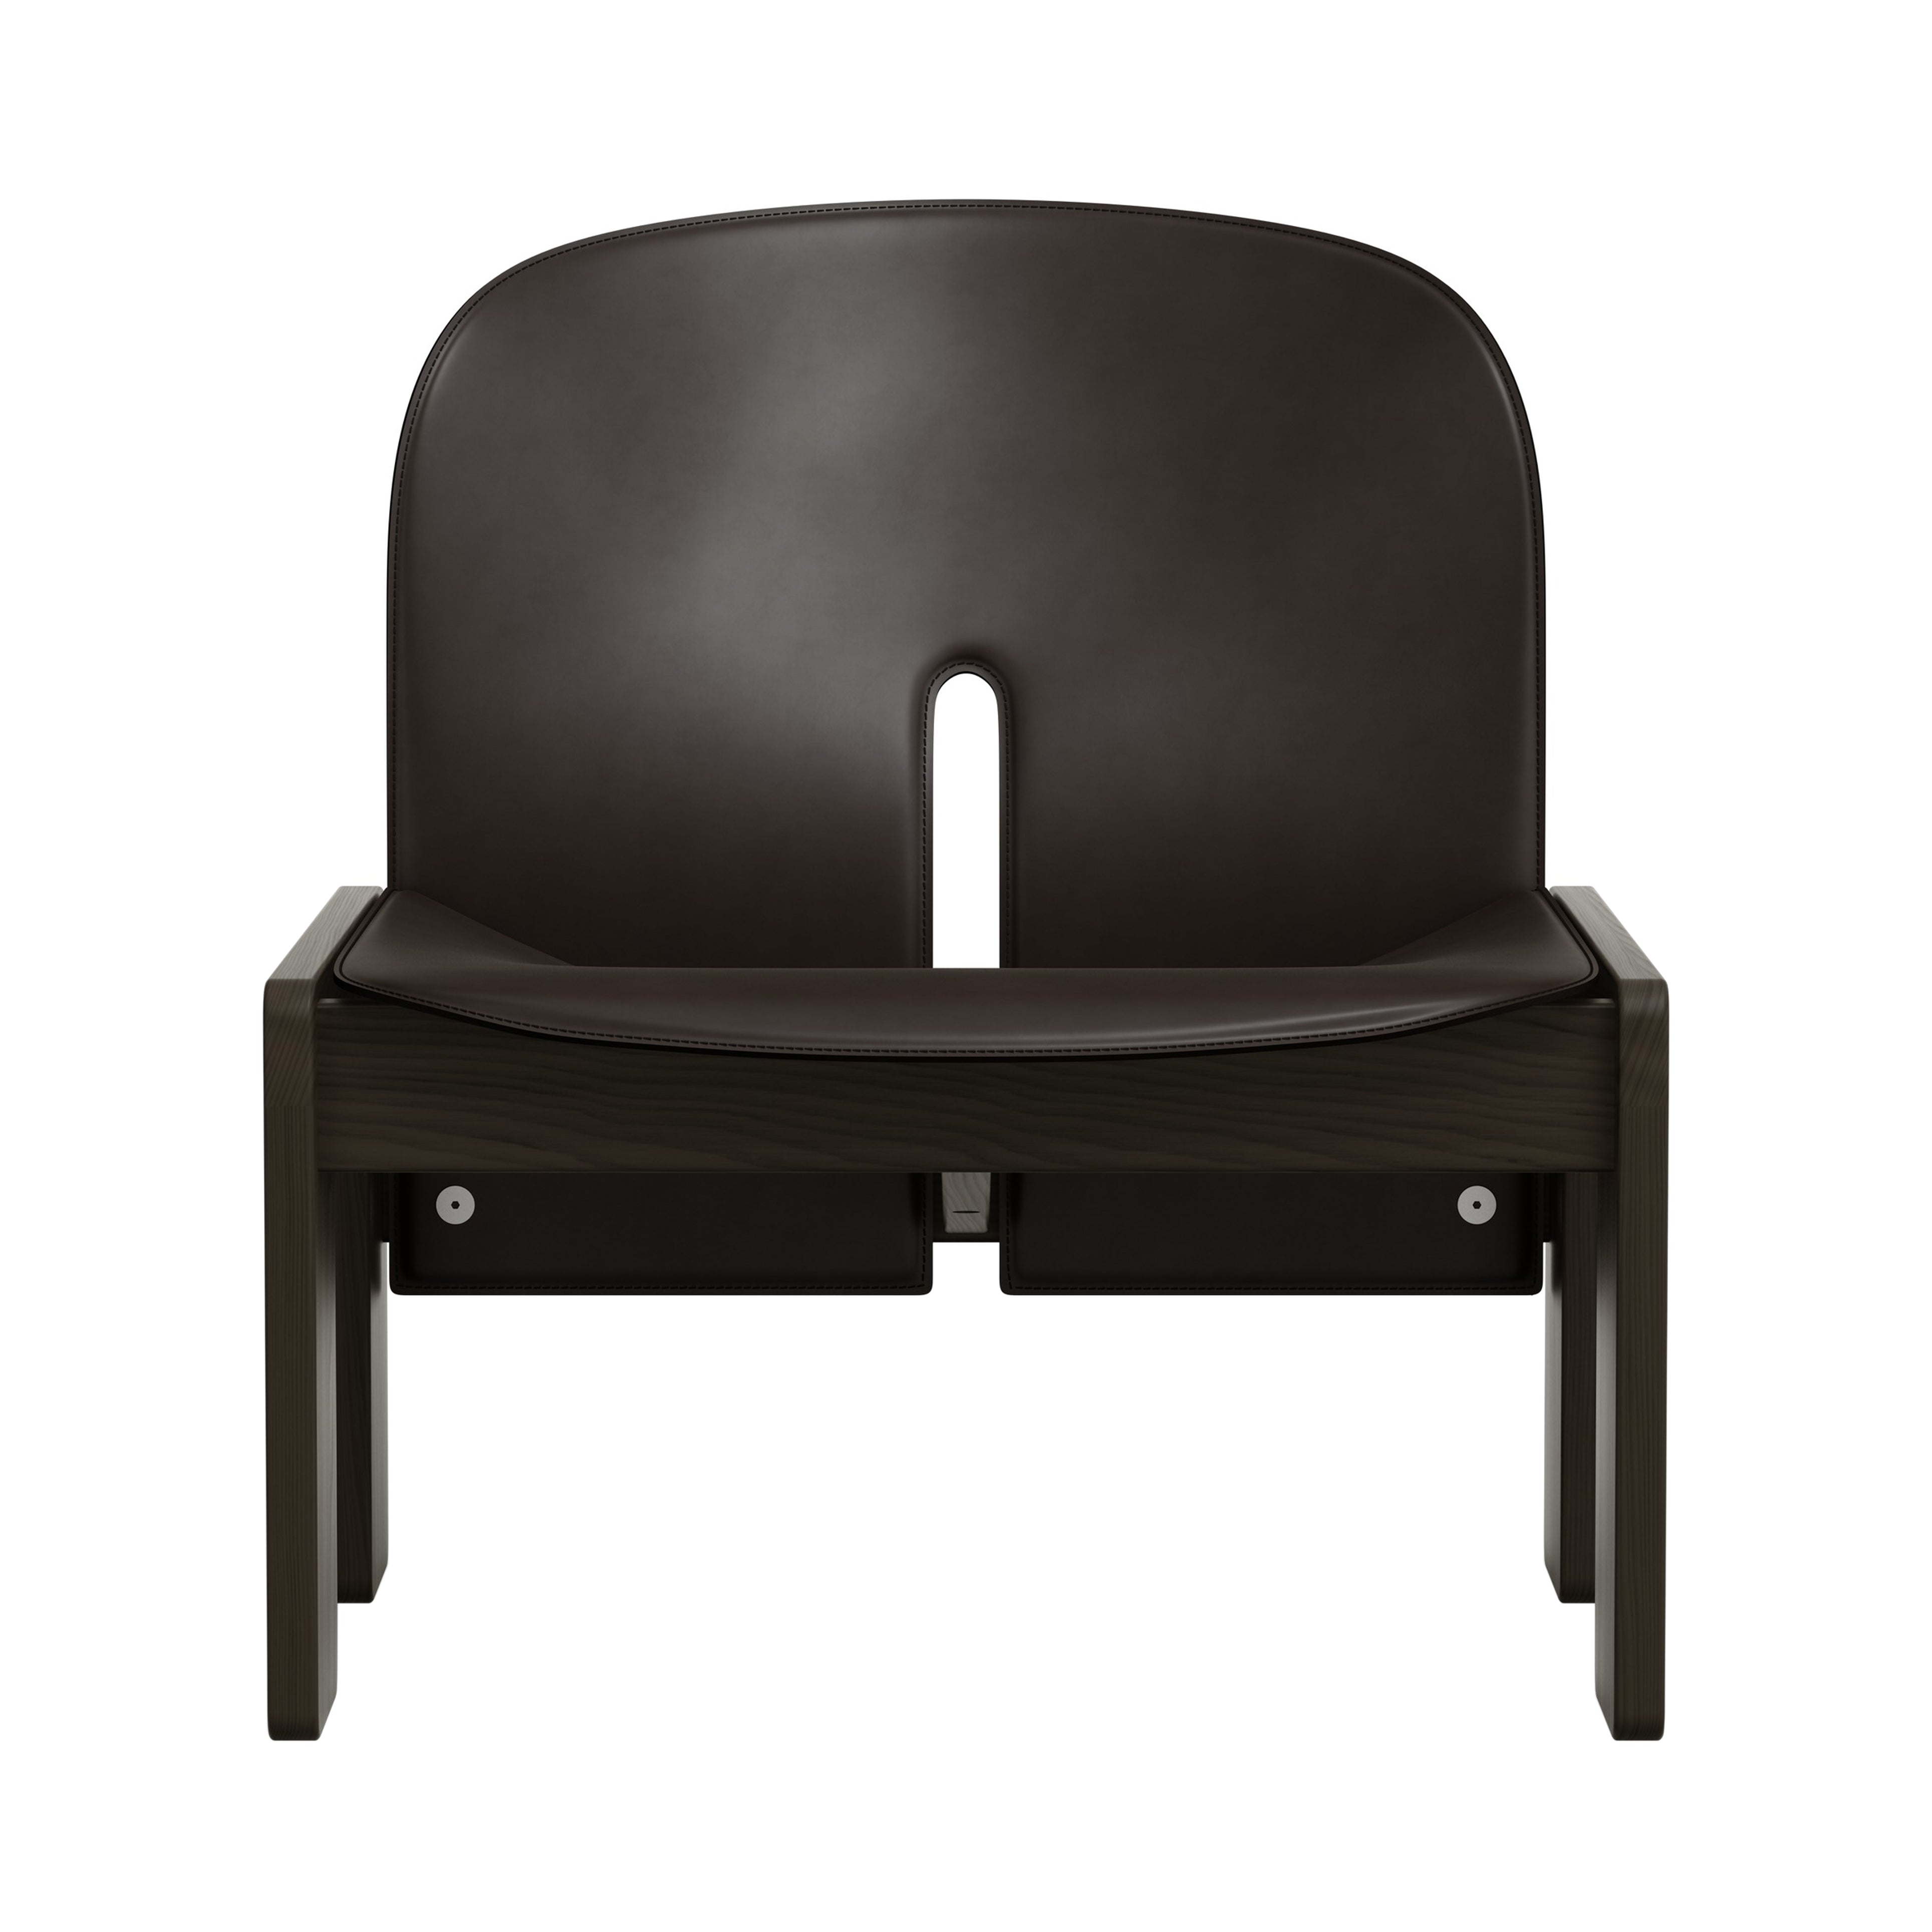 Scarpa 925 Lounge Chair: Mocca Stained Ash + Saddle Leather Nero